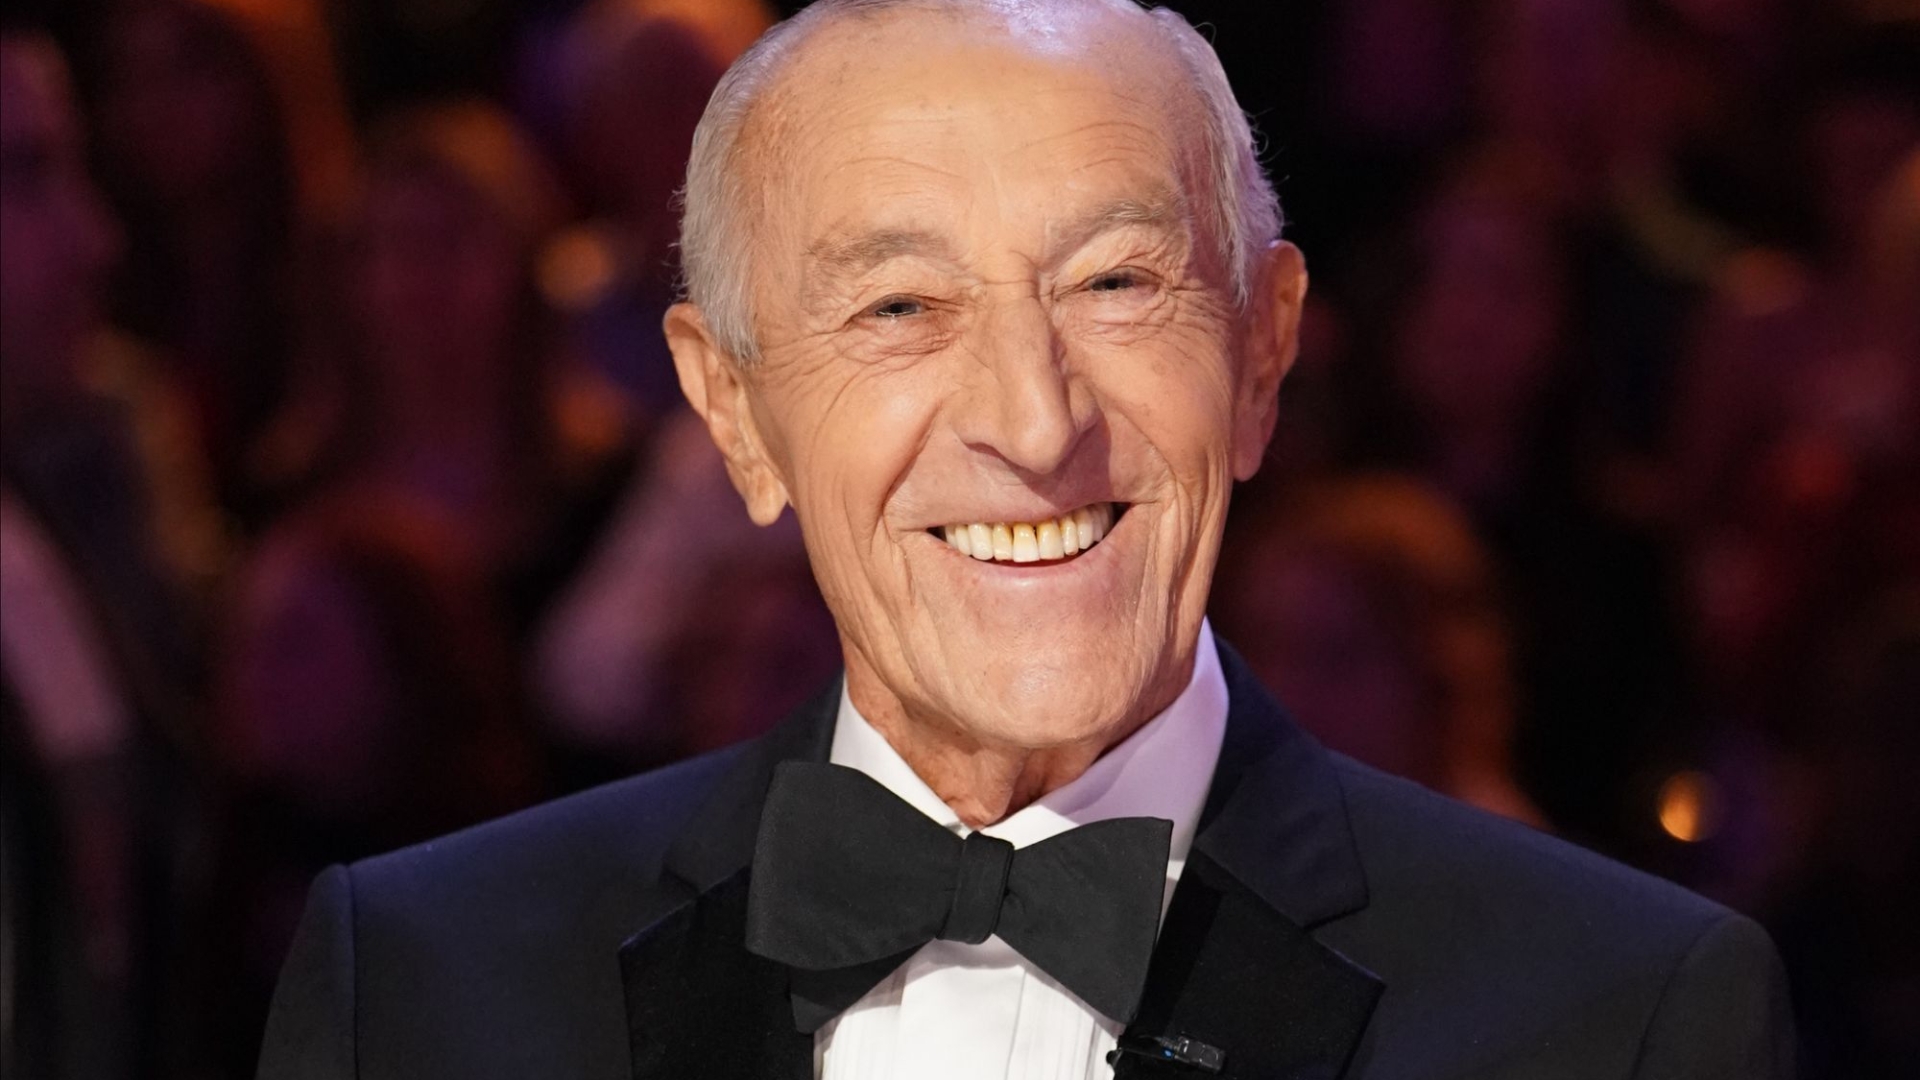 Len Goodman tells his unlikely story of how he became a Strictly contestant after being a’real-life Billy Elliot,’ and finding fame only at the age of 60.